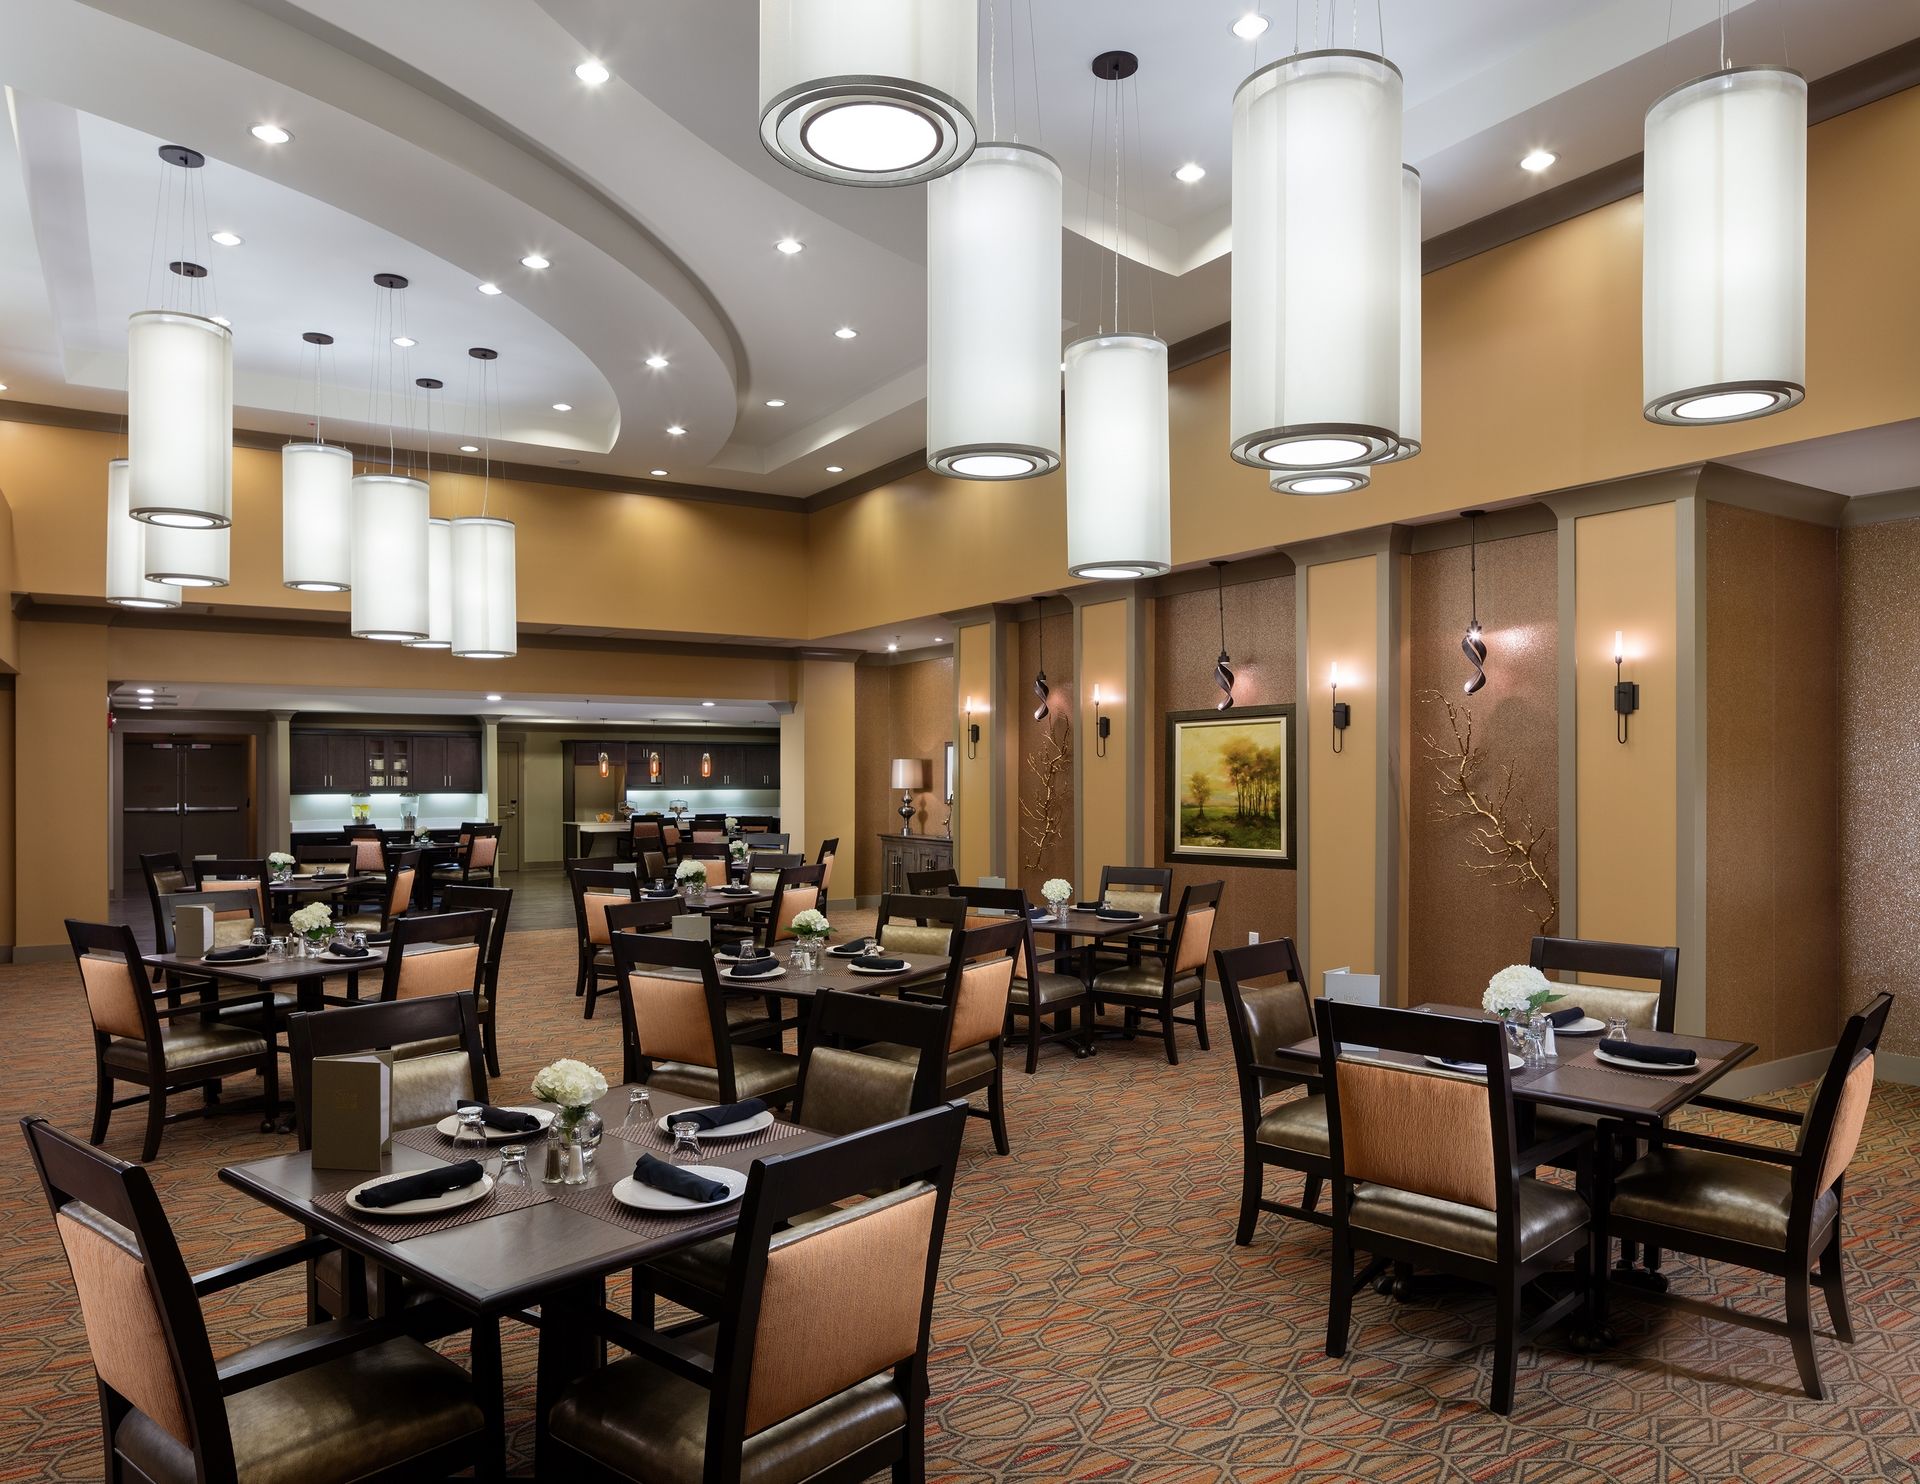 Thrive Athens Memory Care Dining Room Dementia Assisted Living THW senior living architects